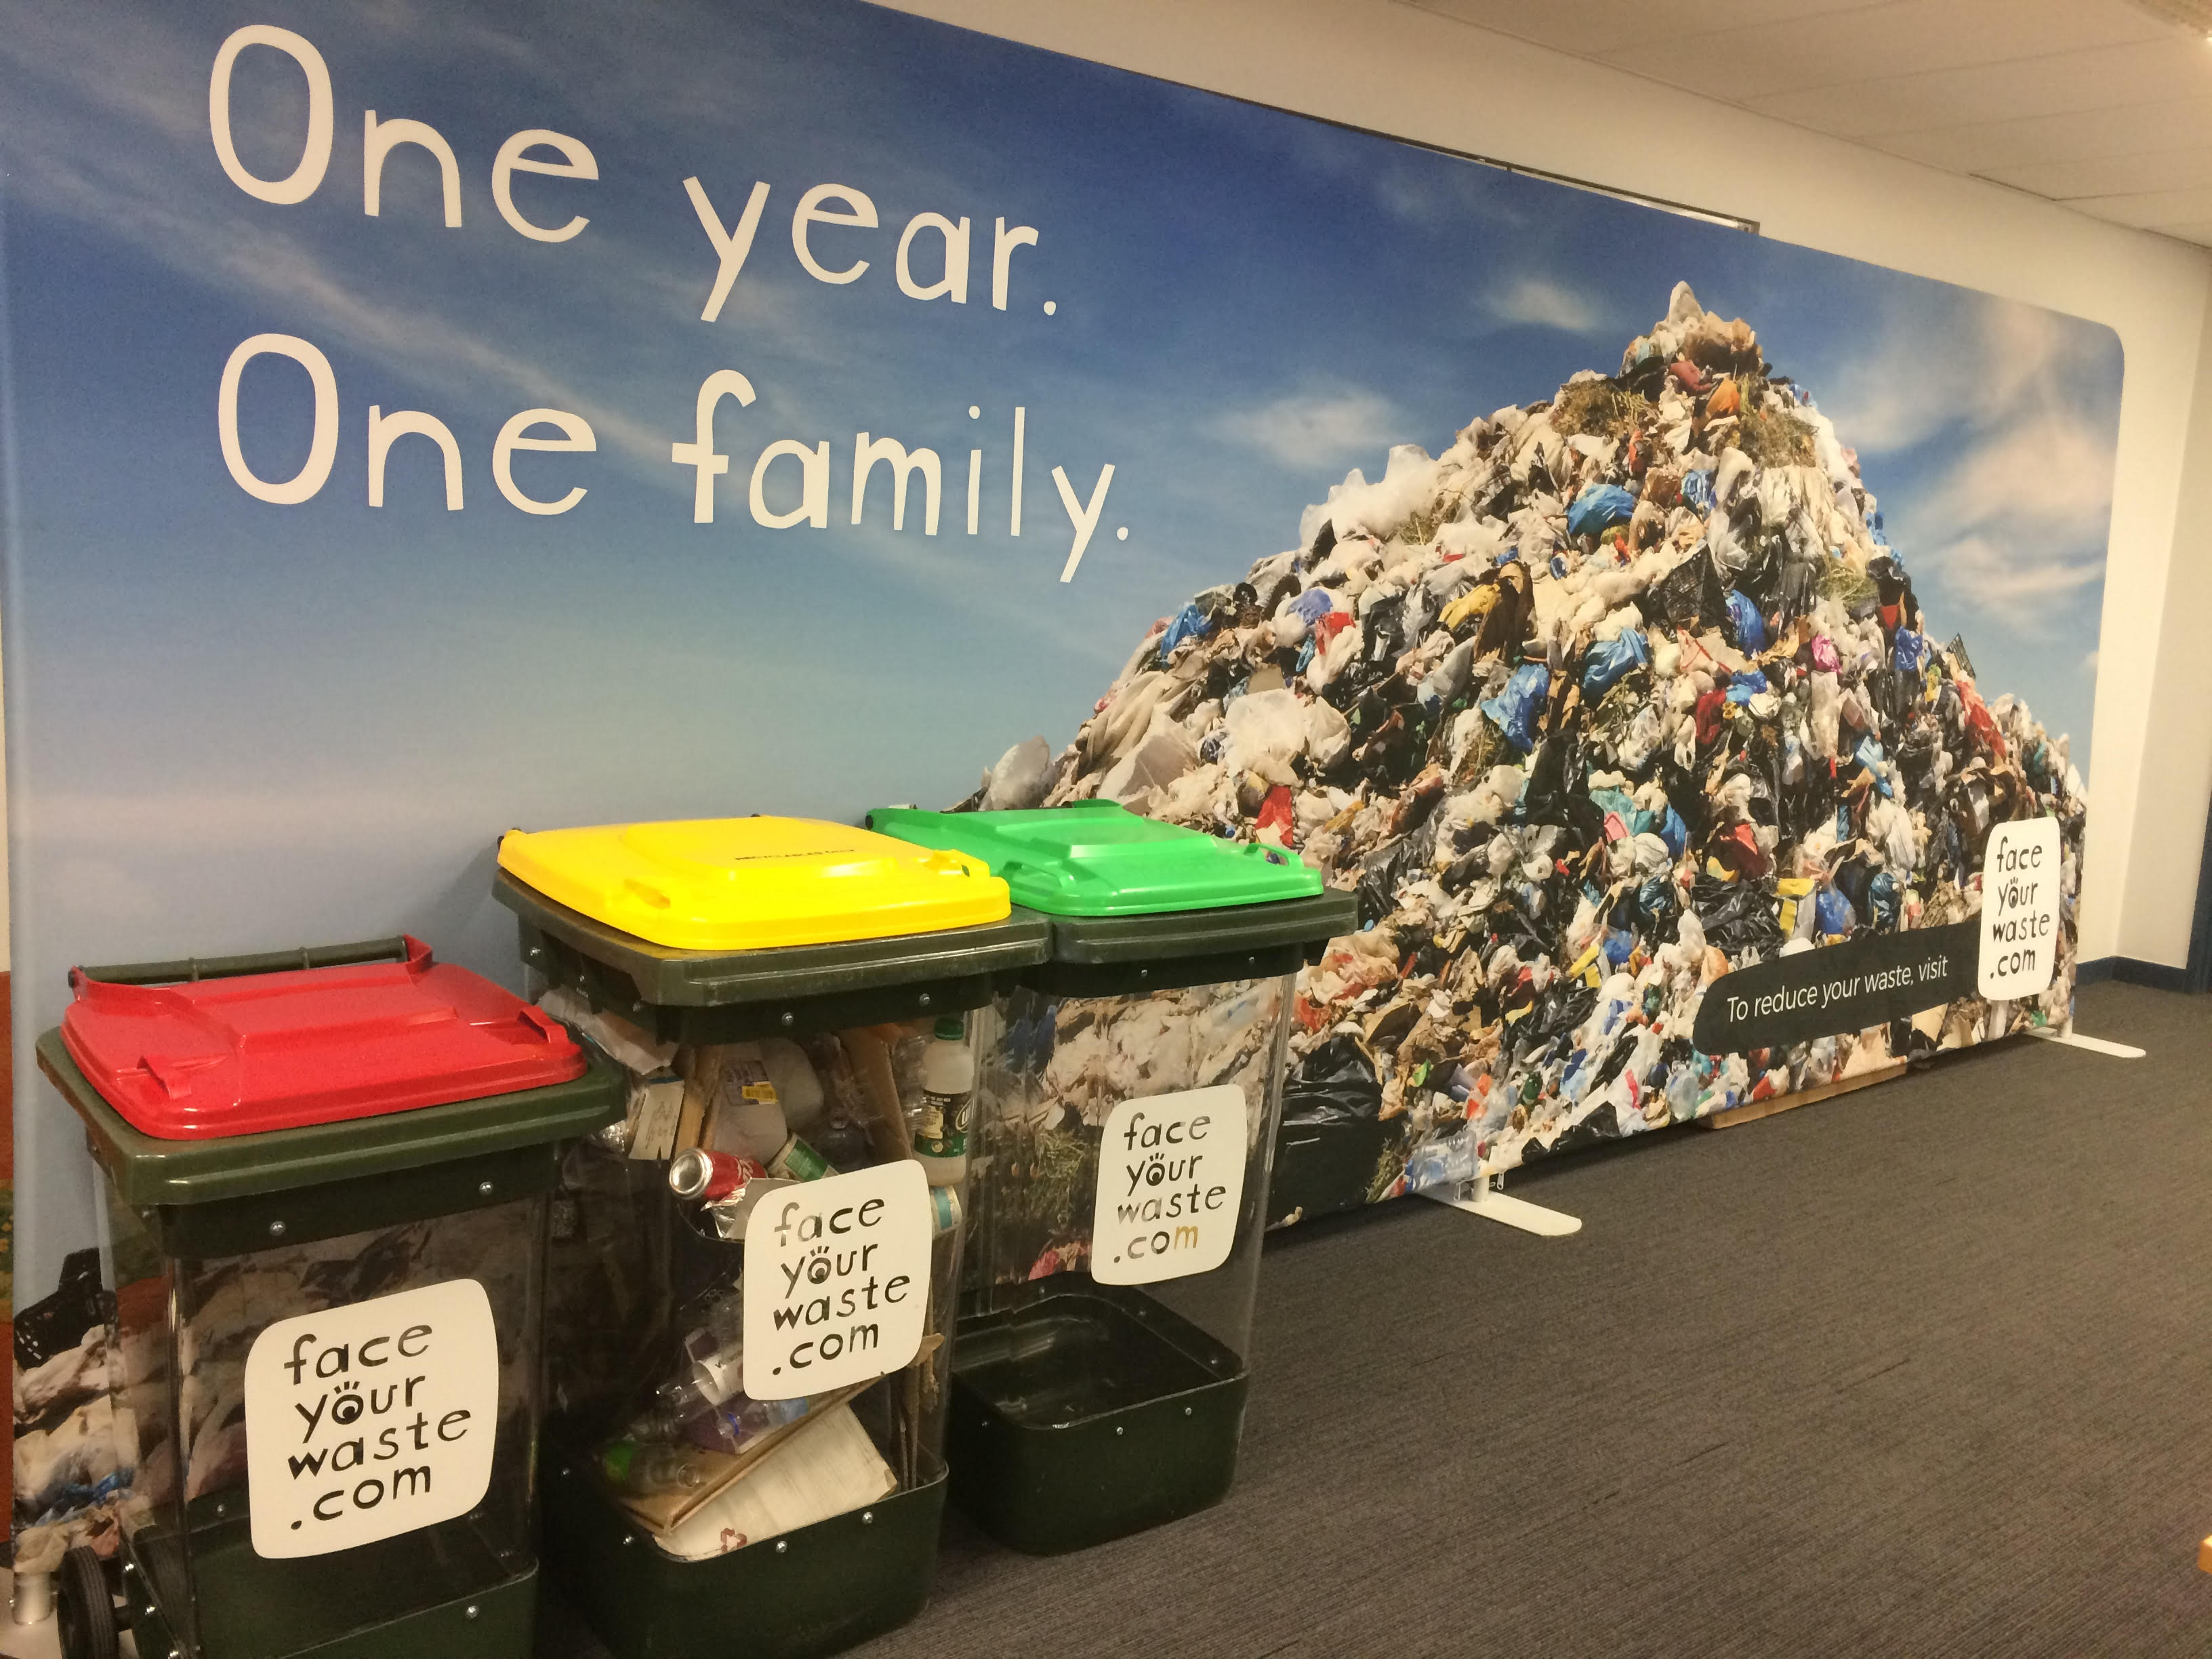 Just how much do we throw away every year?